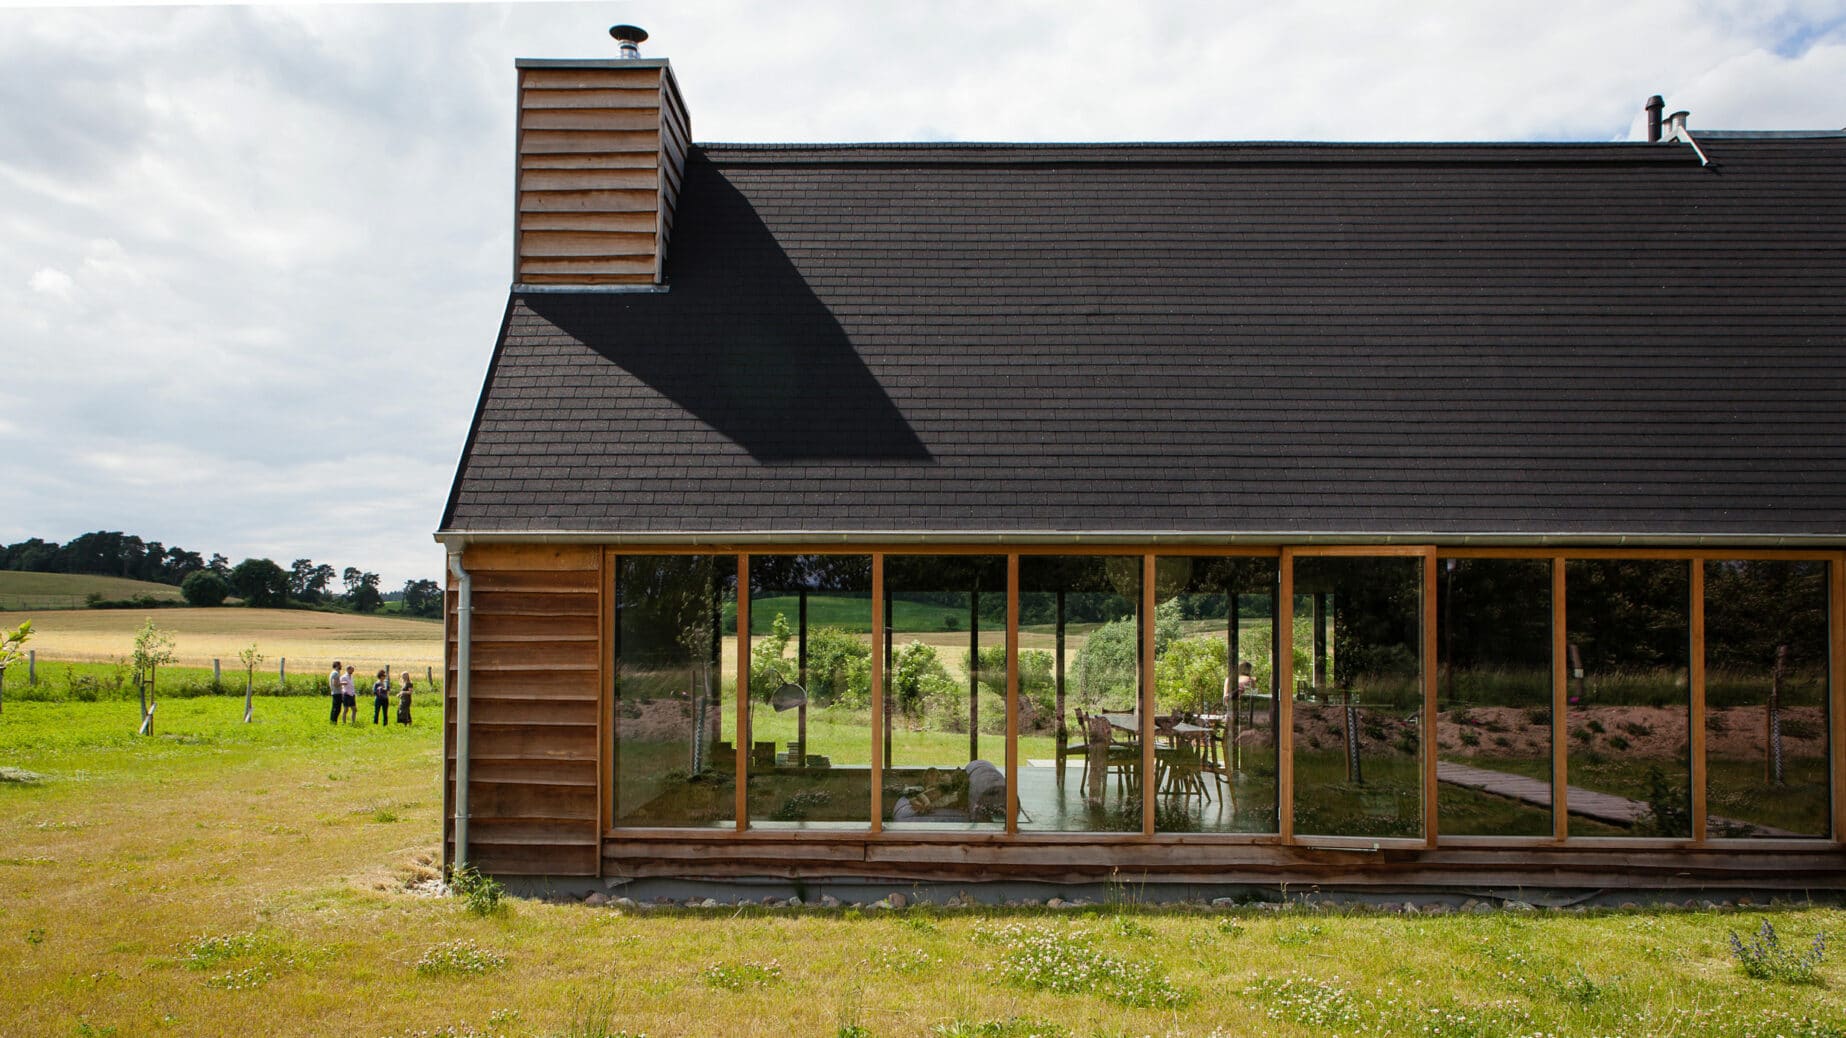 Holiday homes from architect Thomas Kröger